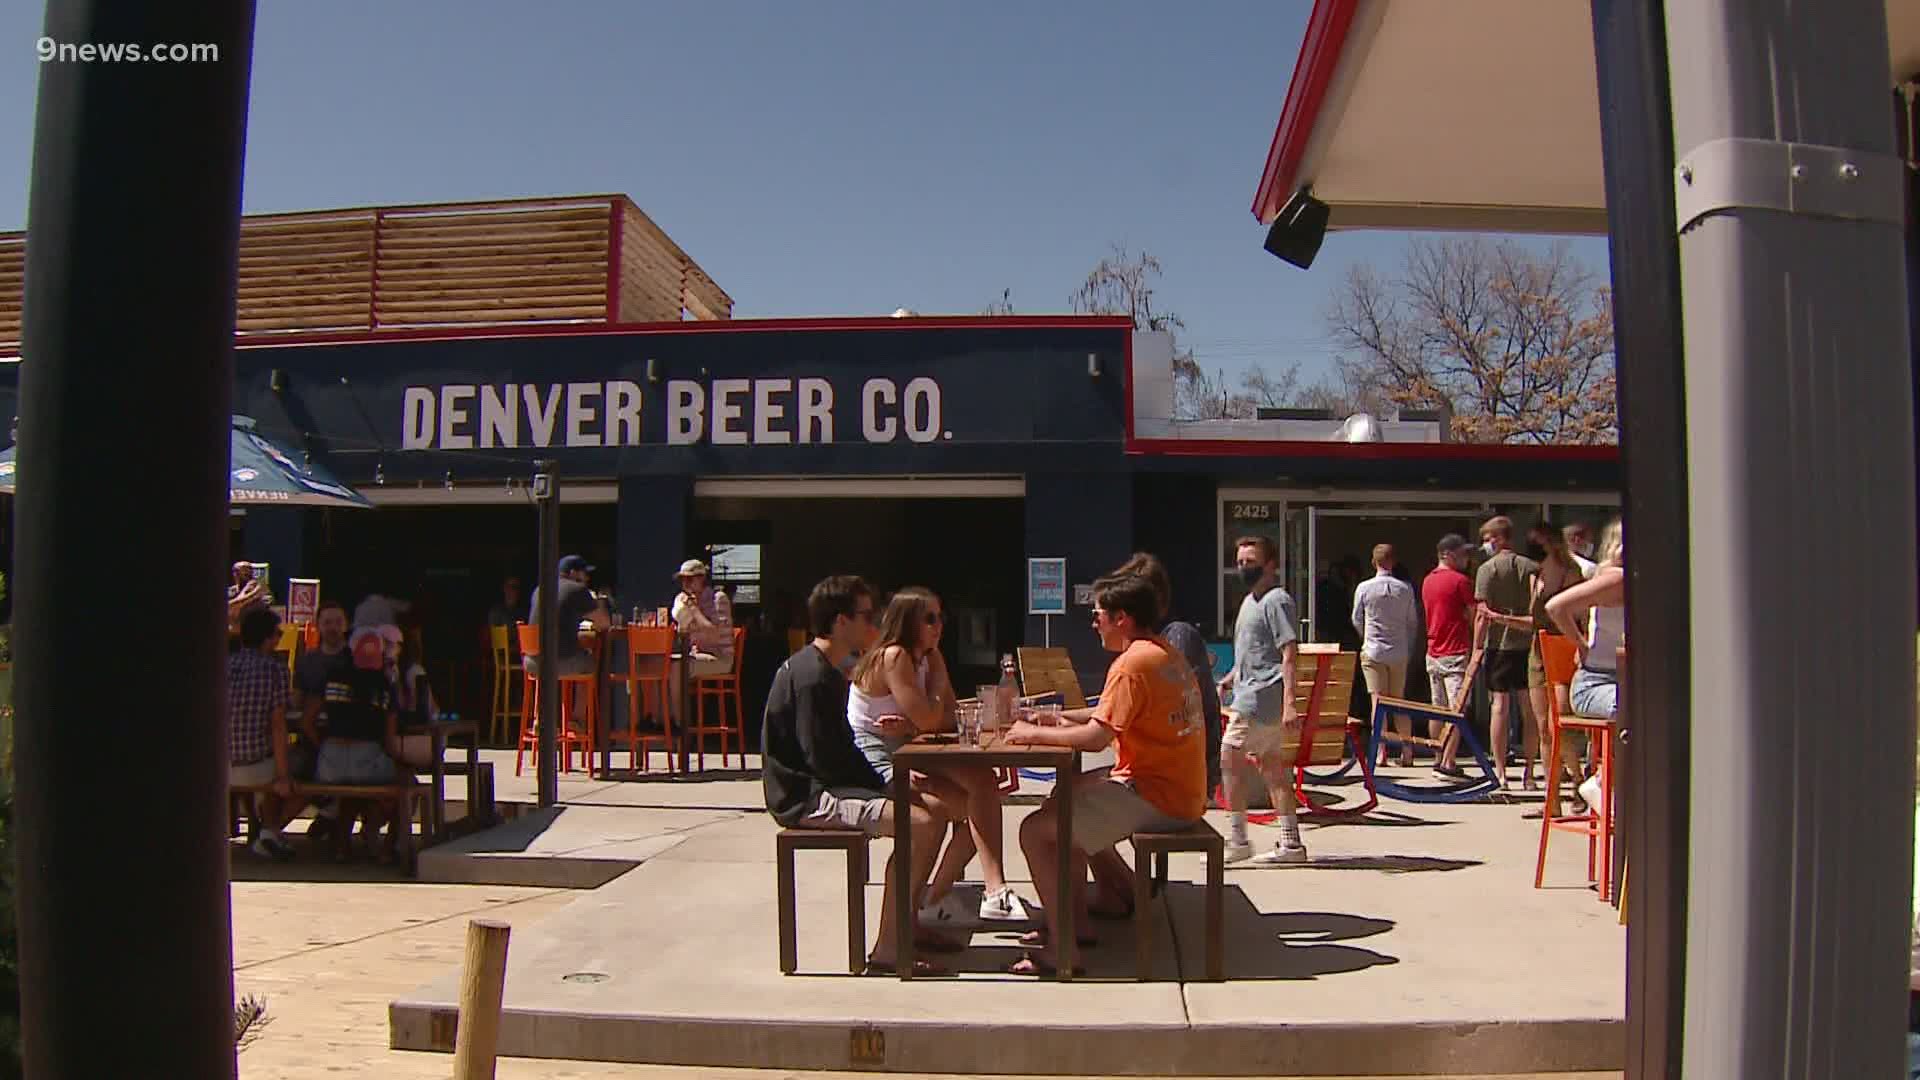 Maybe raising $1 billion to buy a MLB team was too lofty a goal for local brewery Denver Beer Co., but the money they did raise will go to a good cause.